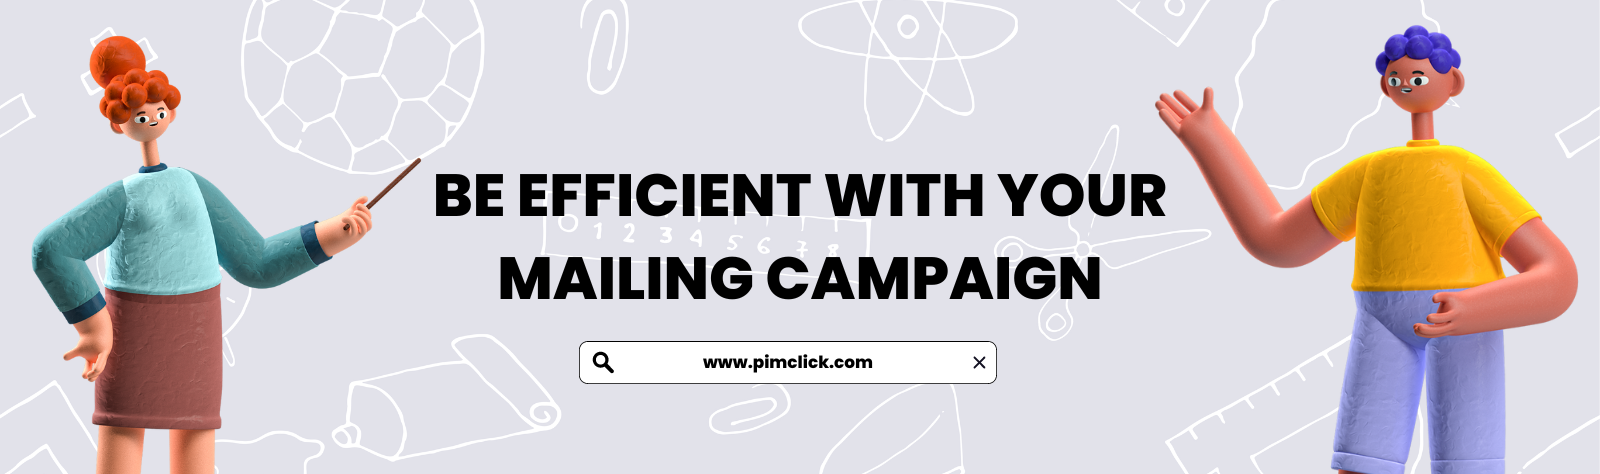 BE EFFICIENT WITH YOUR MAILING CAMPAIGN